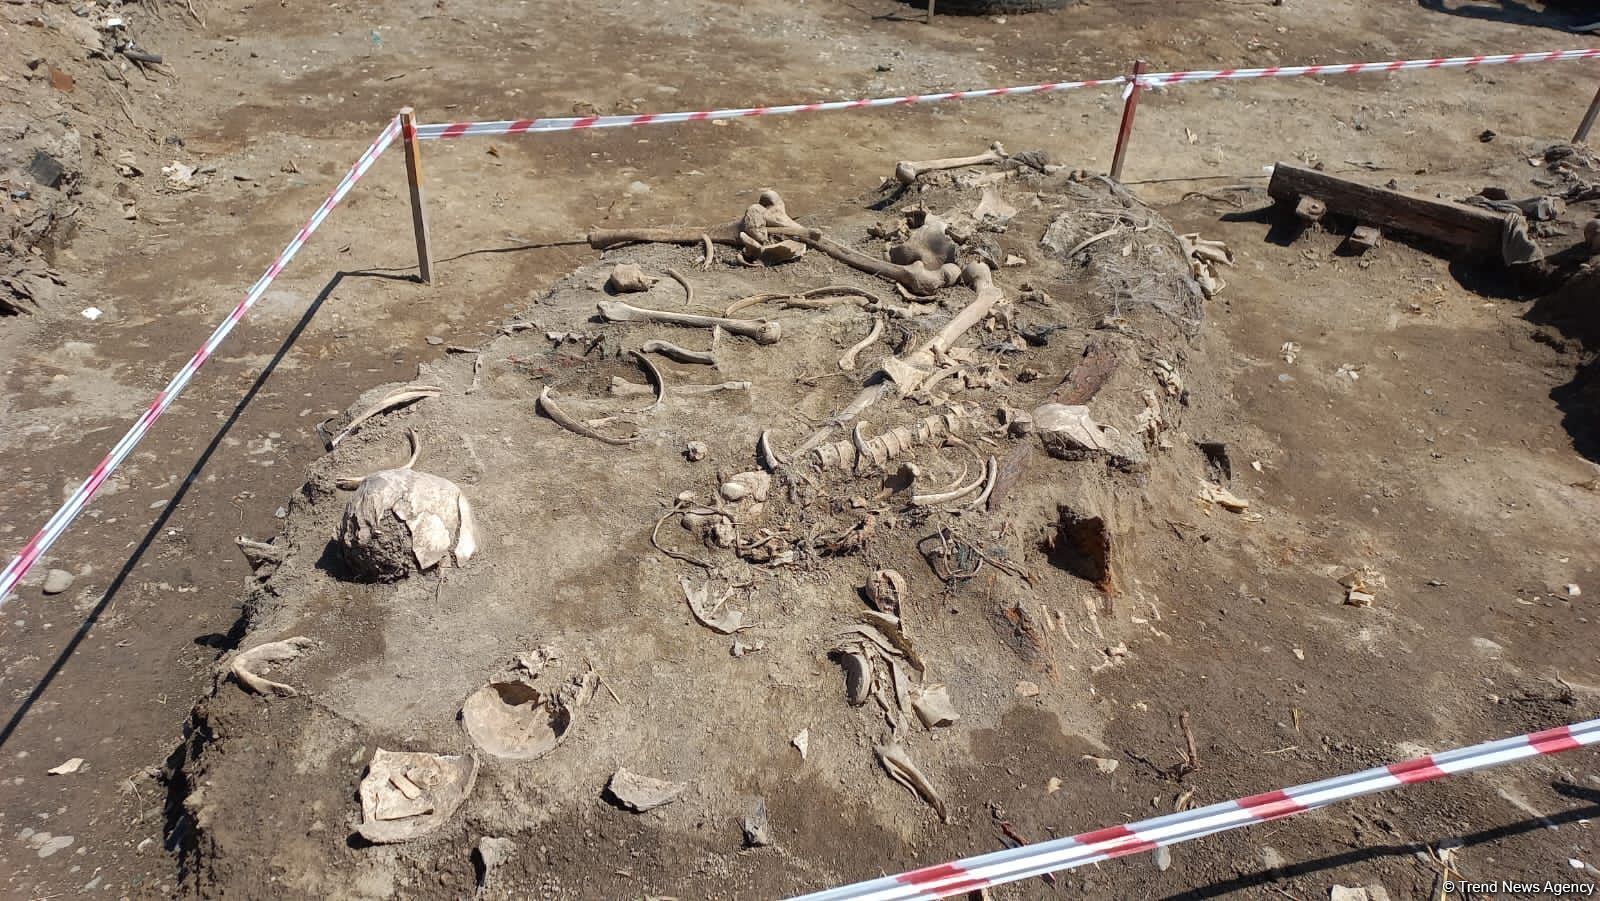 Mass grave discovered in Azerbaijan's Aghdam district (PHOTO/VIDEO)